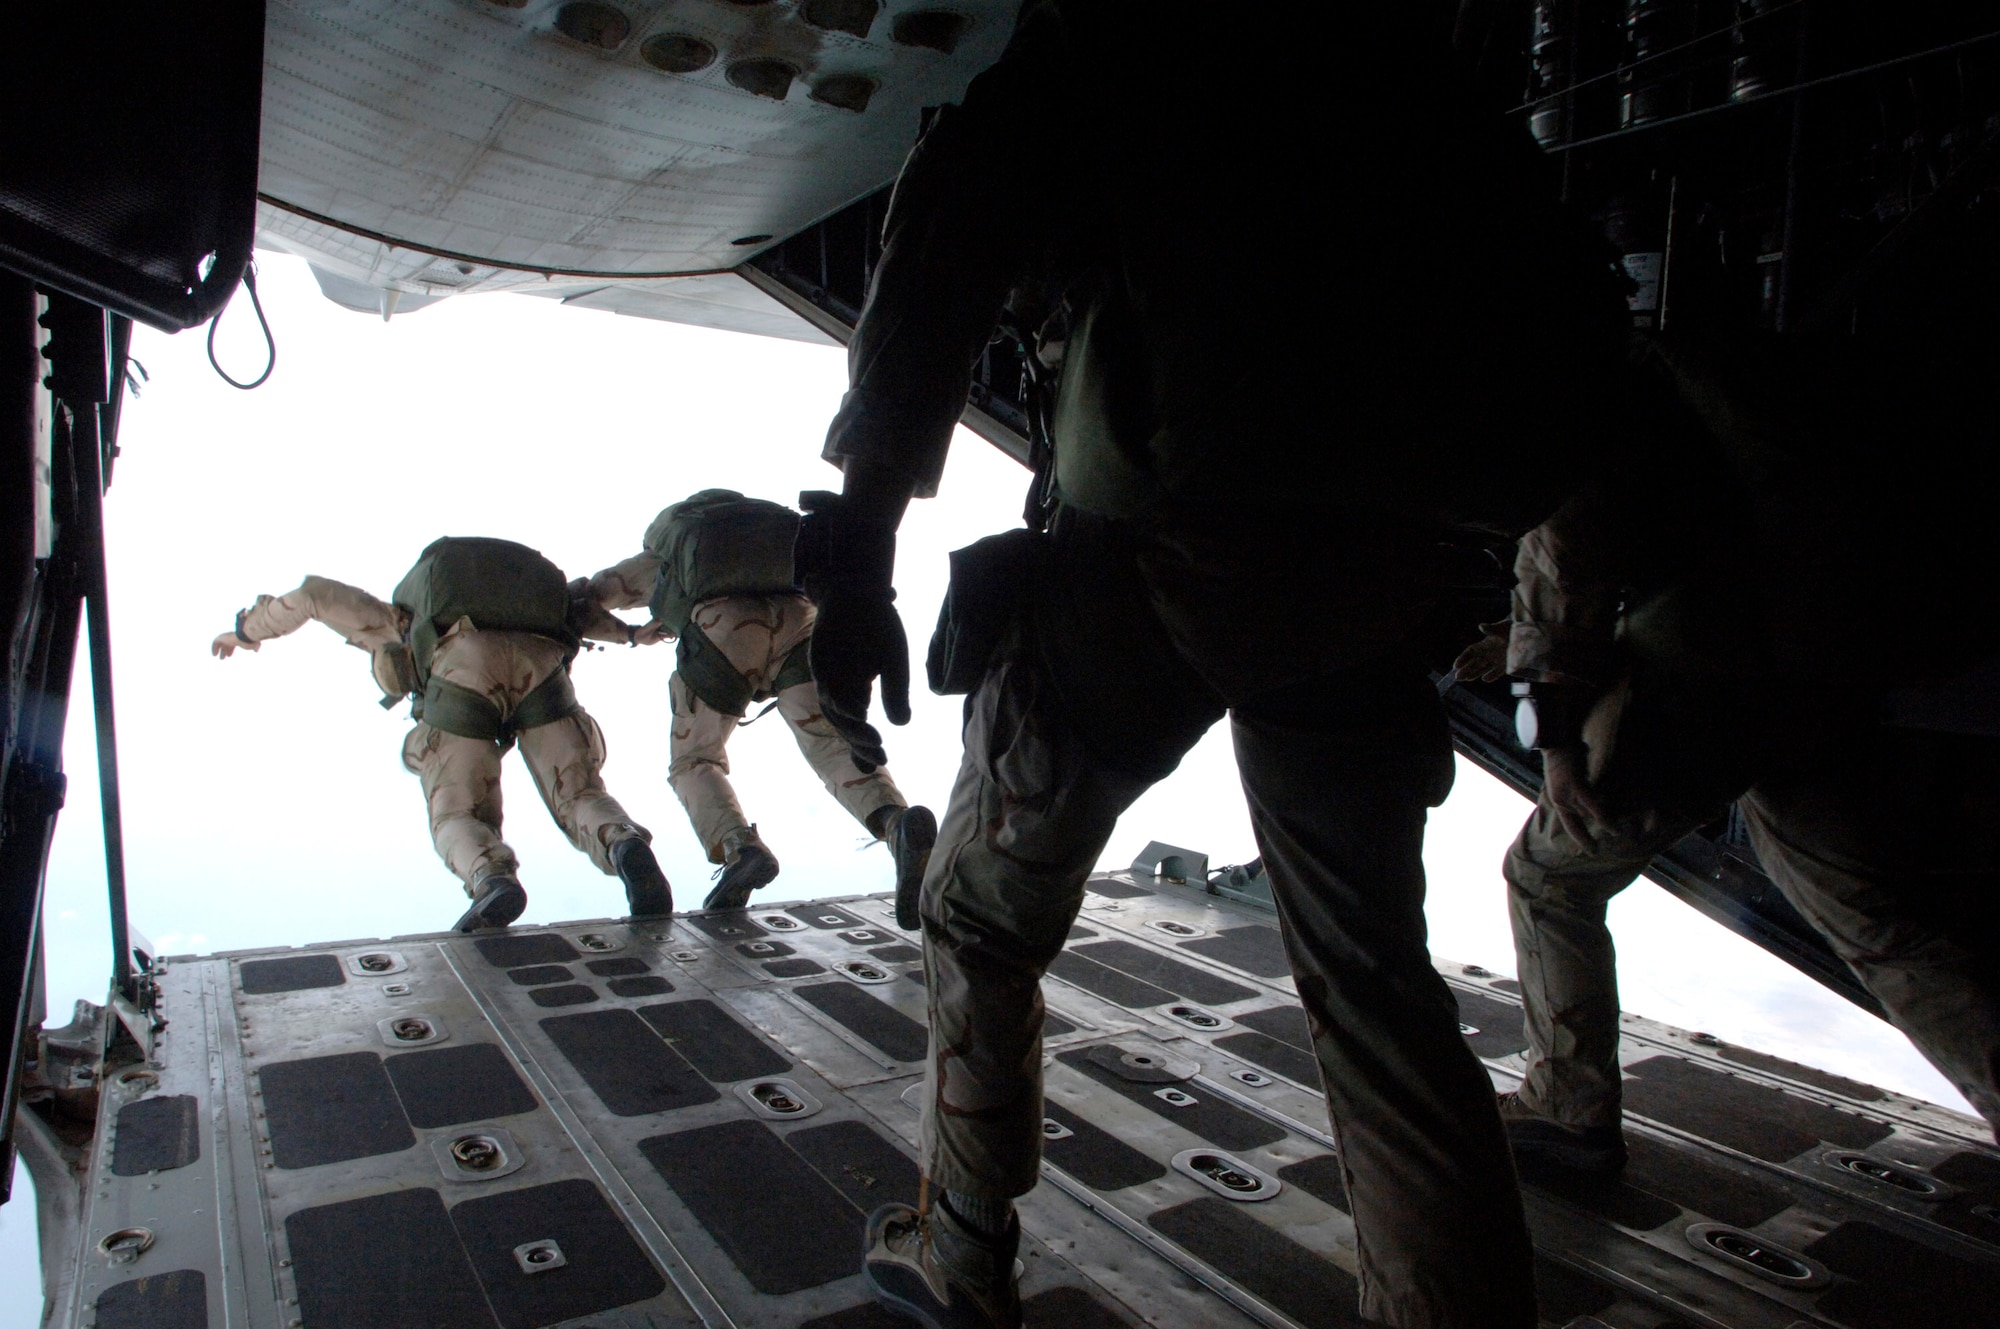 Pararescue jumpers begin their free-fall from 10,000 feet from the cargo ramp of a C-130 Hercules above Camp Lemonier, Djibouti. The training helps Airmen deployed from Davis-Monthan Air Force Base, Ariz., stay proficient in jump skills. (U.S. Air Force photo/Master Sgt. Scott Wagers)